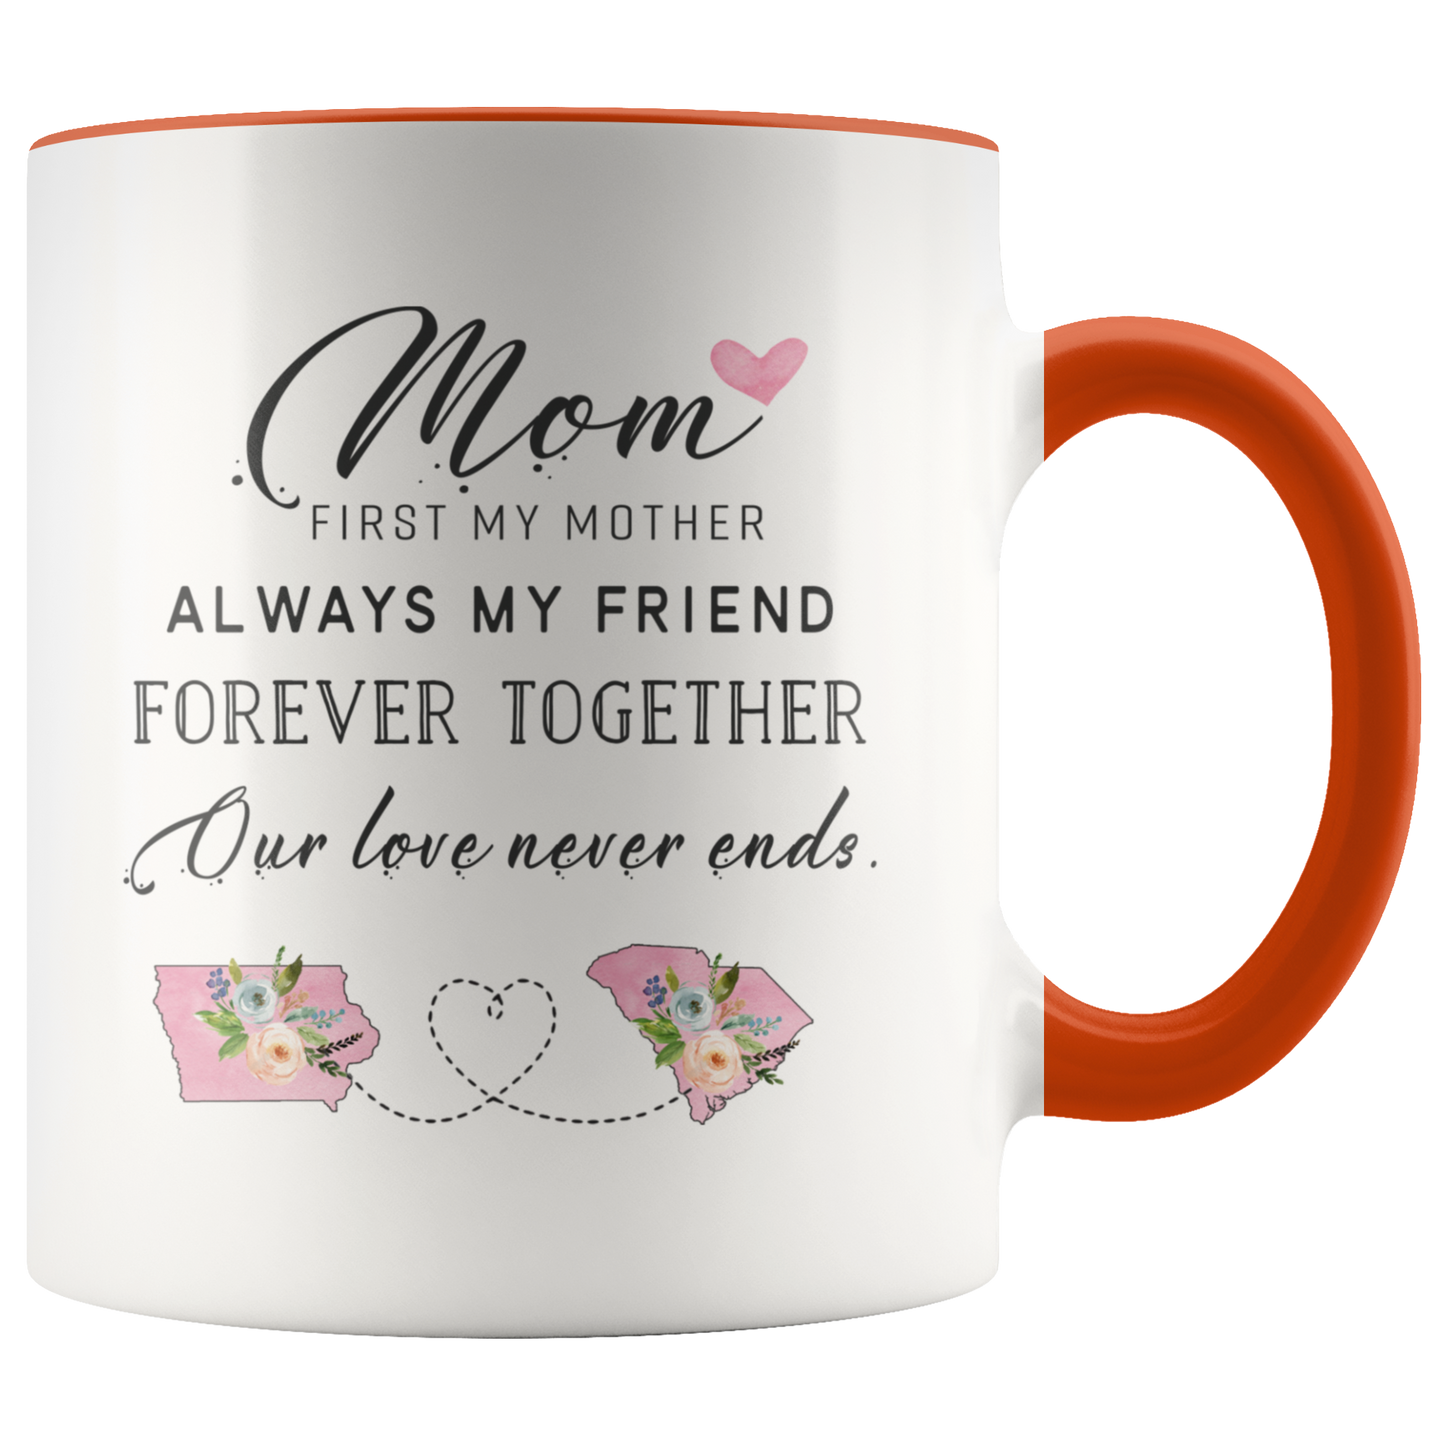 ND-21360050-sp-25933 - [ Iowa | South Carolina ] (CC_Accent_Mug_) Mothers Day Accent Mug  - Mom, First My Mother Always My